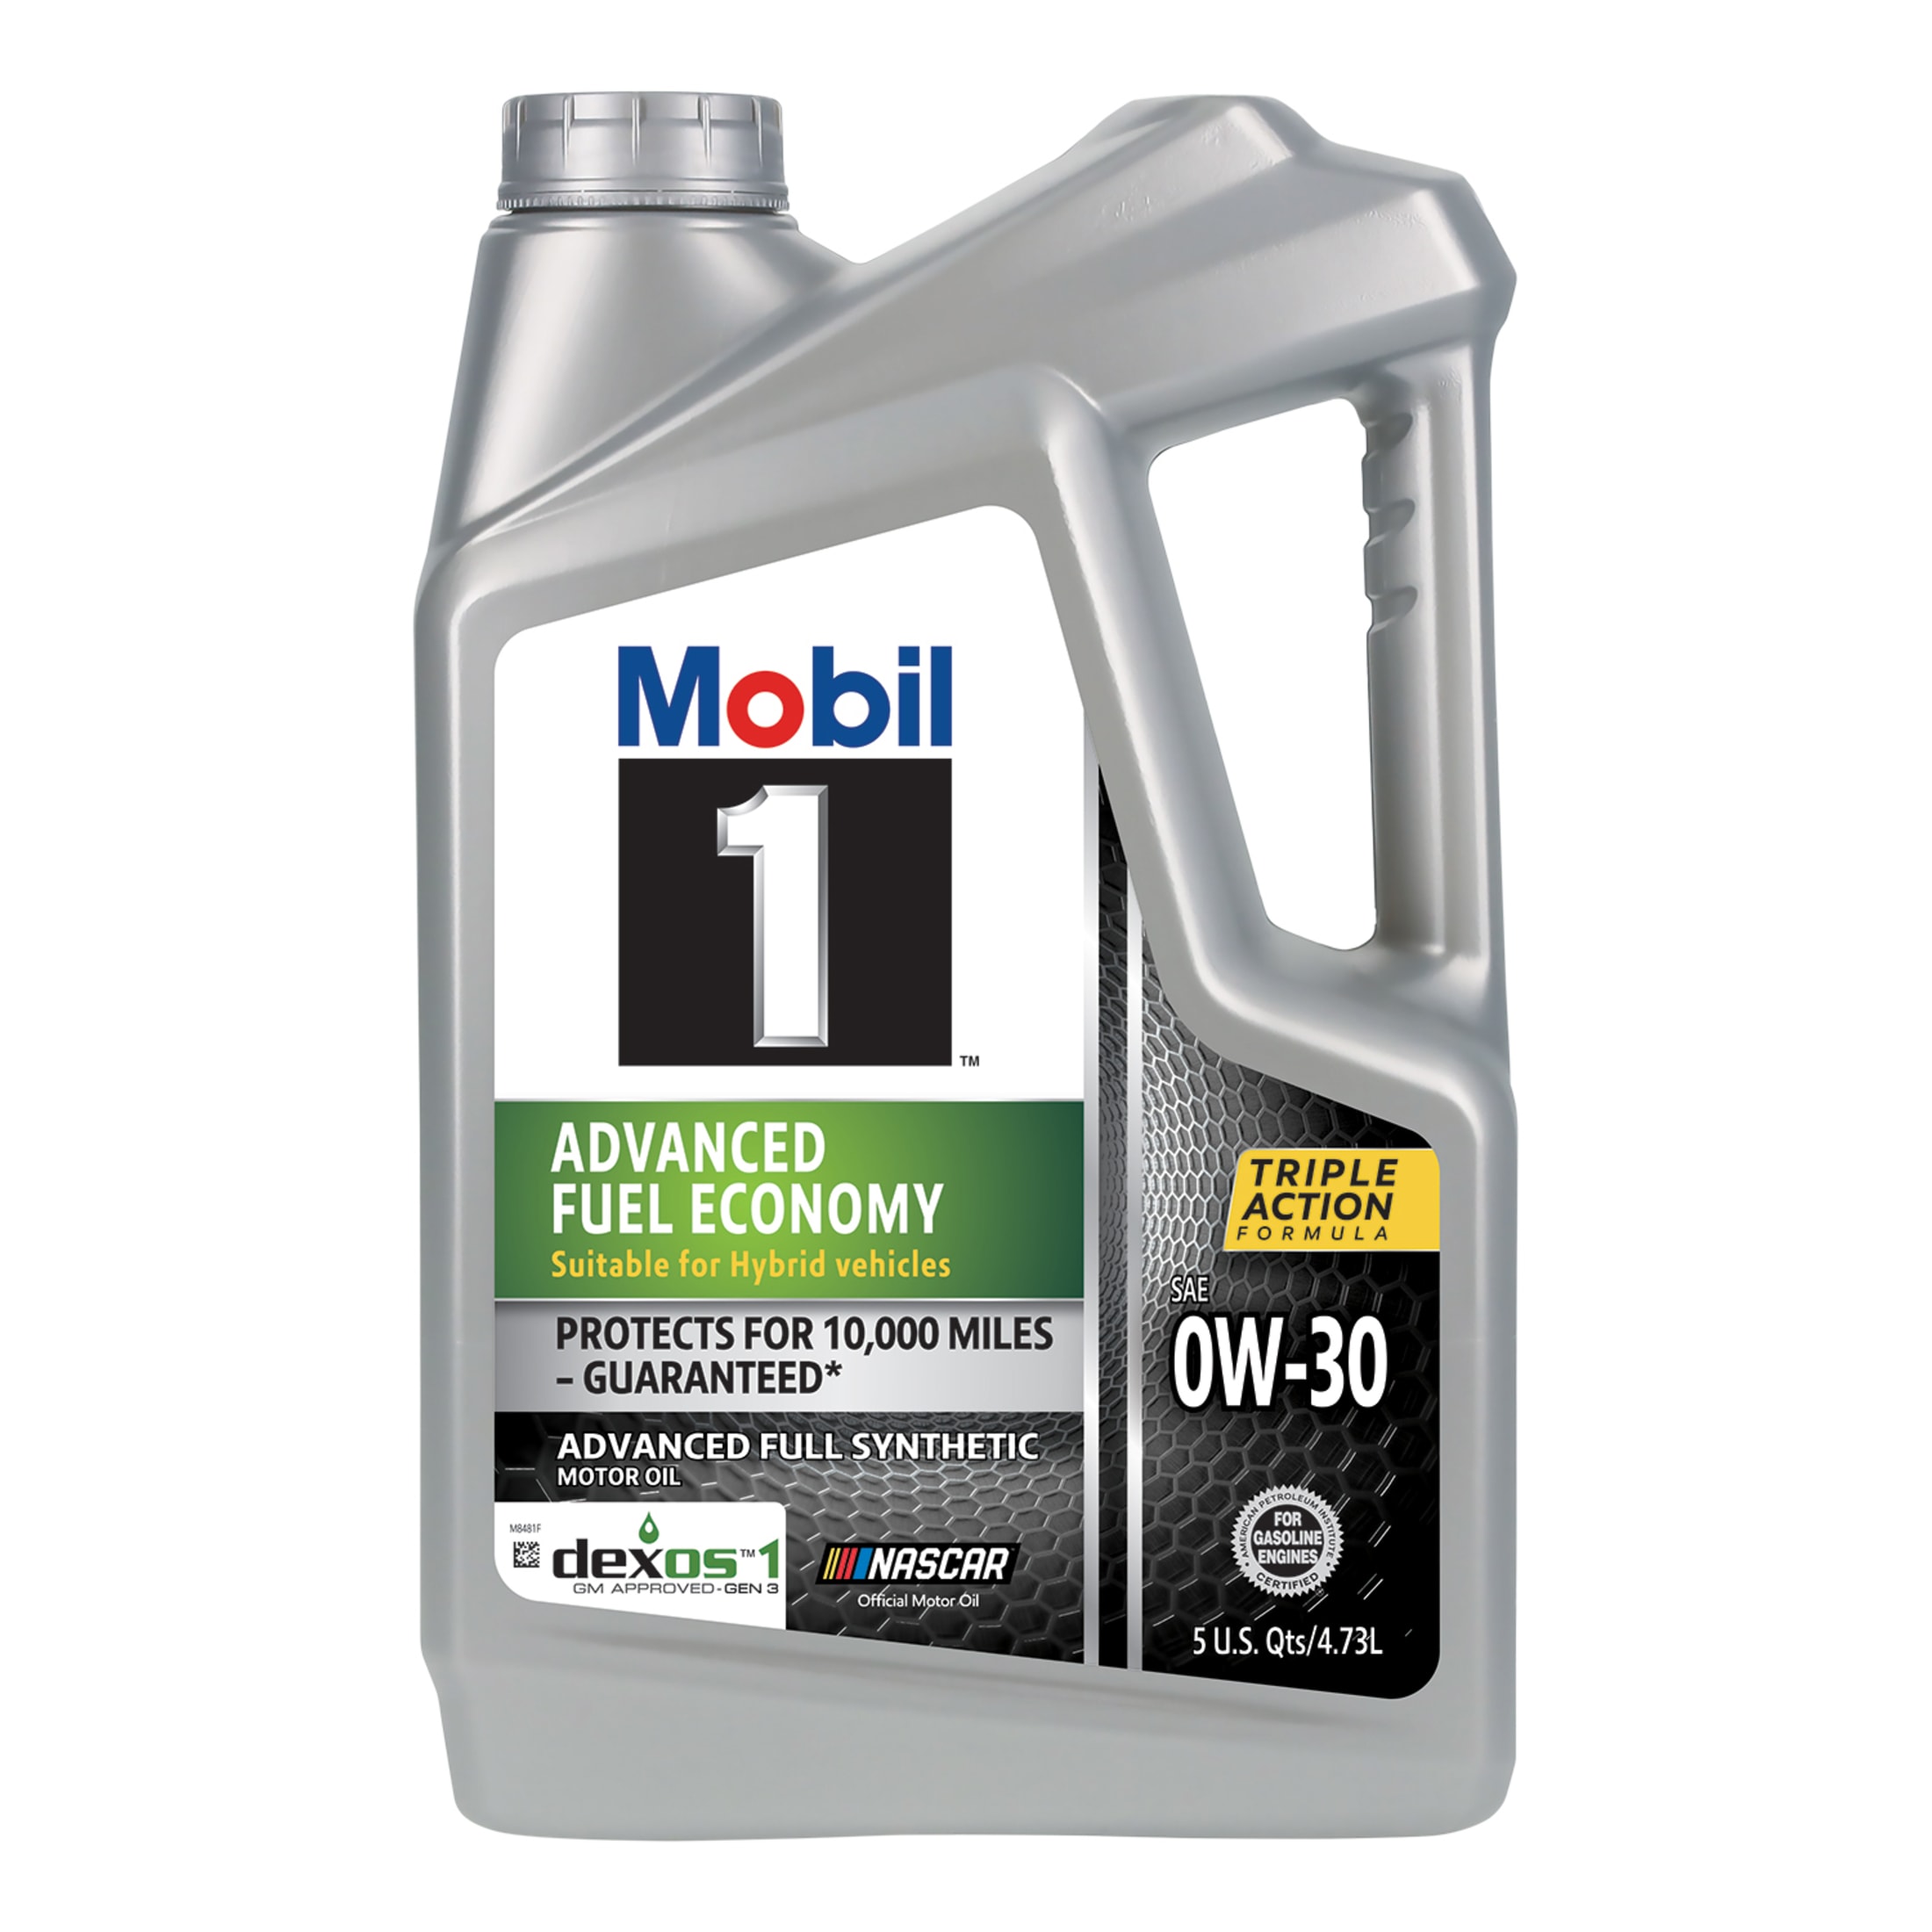 Mobil 1 Advanced Fuel Economy Full Synthetic Motor Oil 0W-30, 5 Quart - image 1 of 9